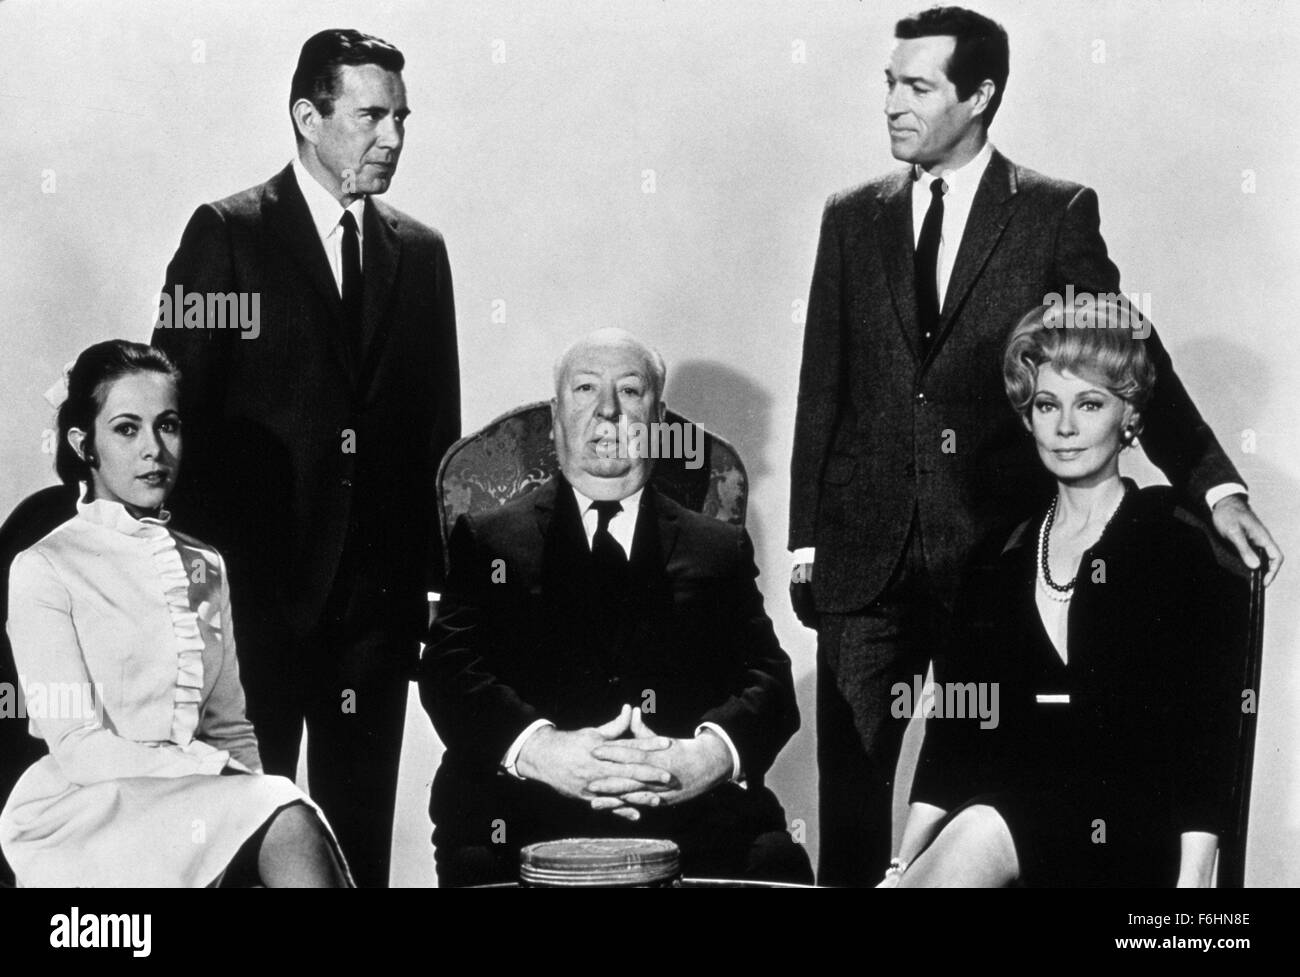 1969, Film Title: TOPAZ, Director: ALFRED HITCHCOCK, Studio: UNIVERSAL, Pictured: ENSEMBLE, JOHN FORSYTHE, ALFRED HITCHCOCK, CLAUDE JADE, DANY ROBIN. (Credit Image: SNAP) Stock Photo